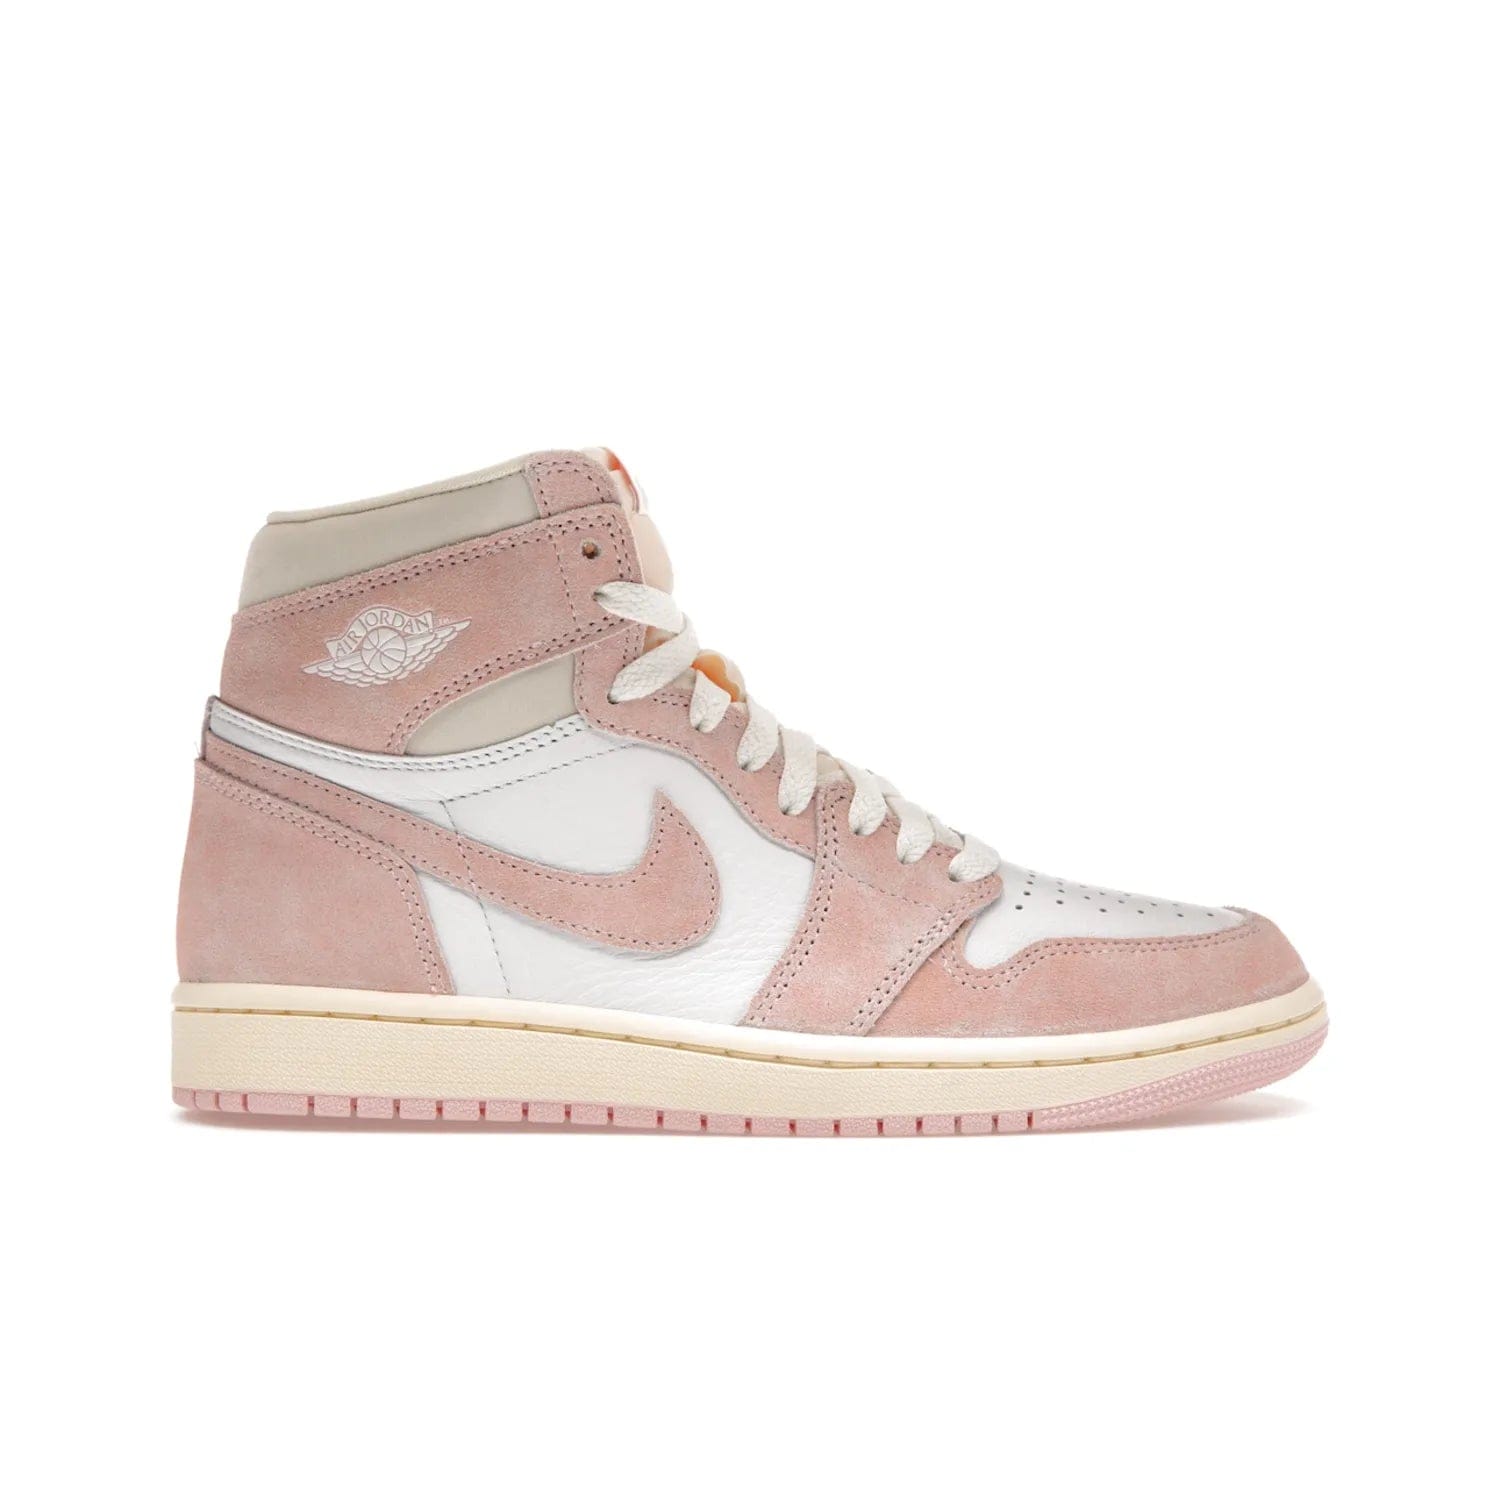 Jordan 1 Retro High OG Washed Pink (Women's) - Image 1 - Only at www.BallersClubKickz.com - Iconic Air Jordan 1 Retro High OG for women with unique pink suede and white leather uppers. Get the timeless look on April 22, 2023.